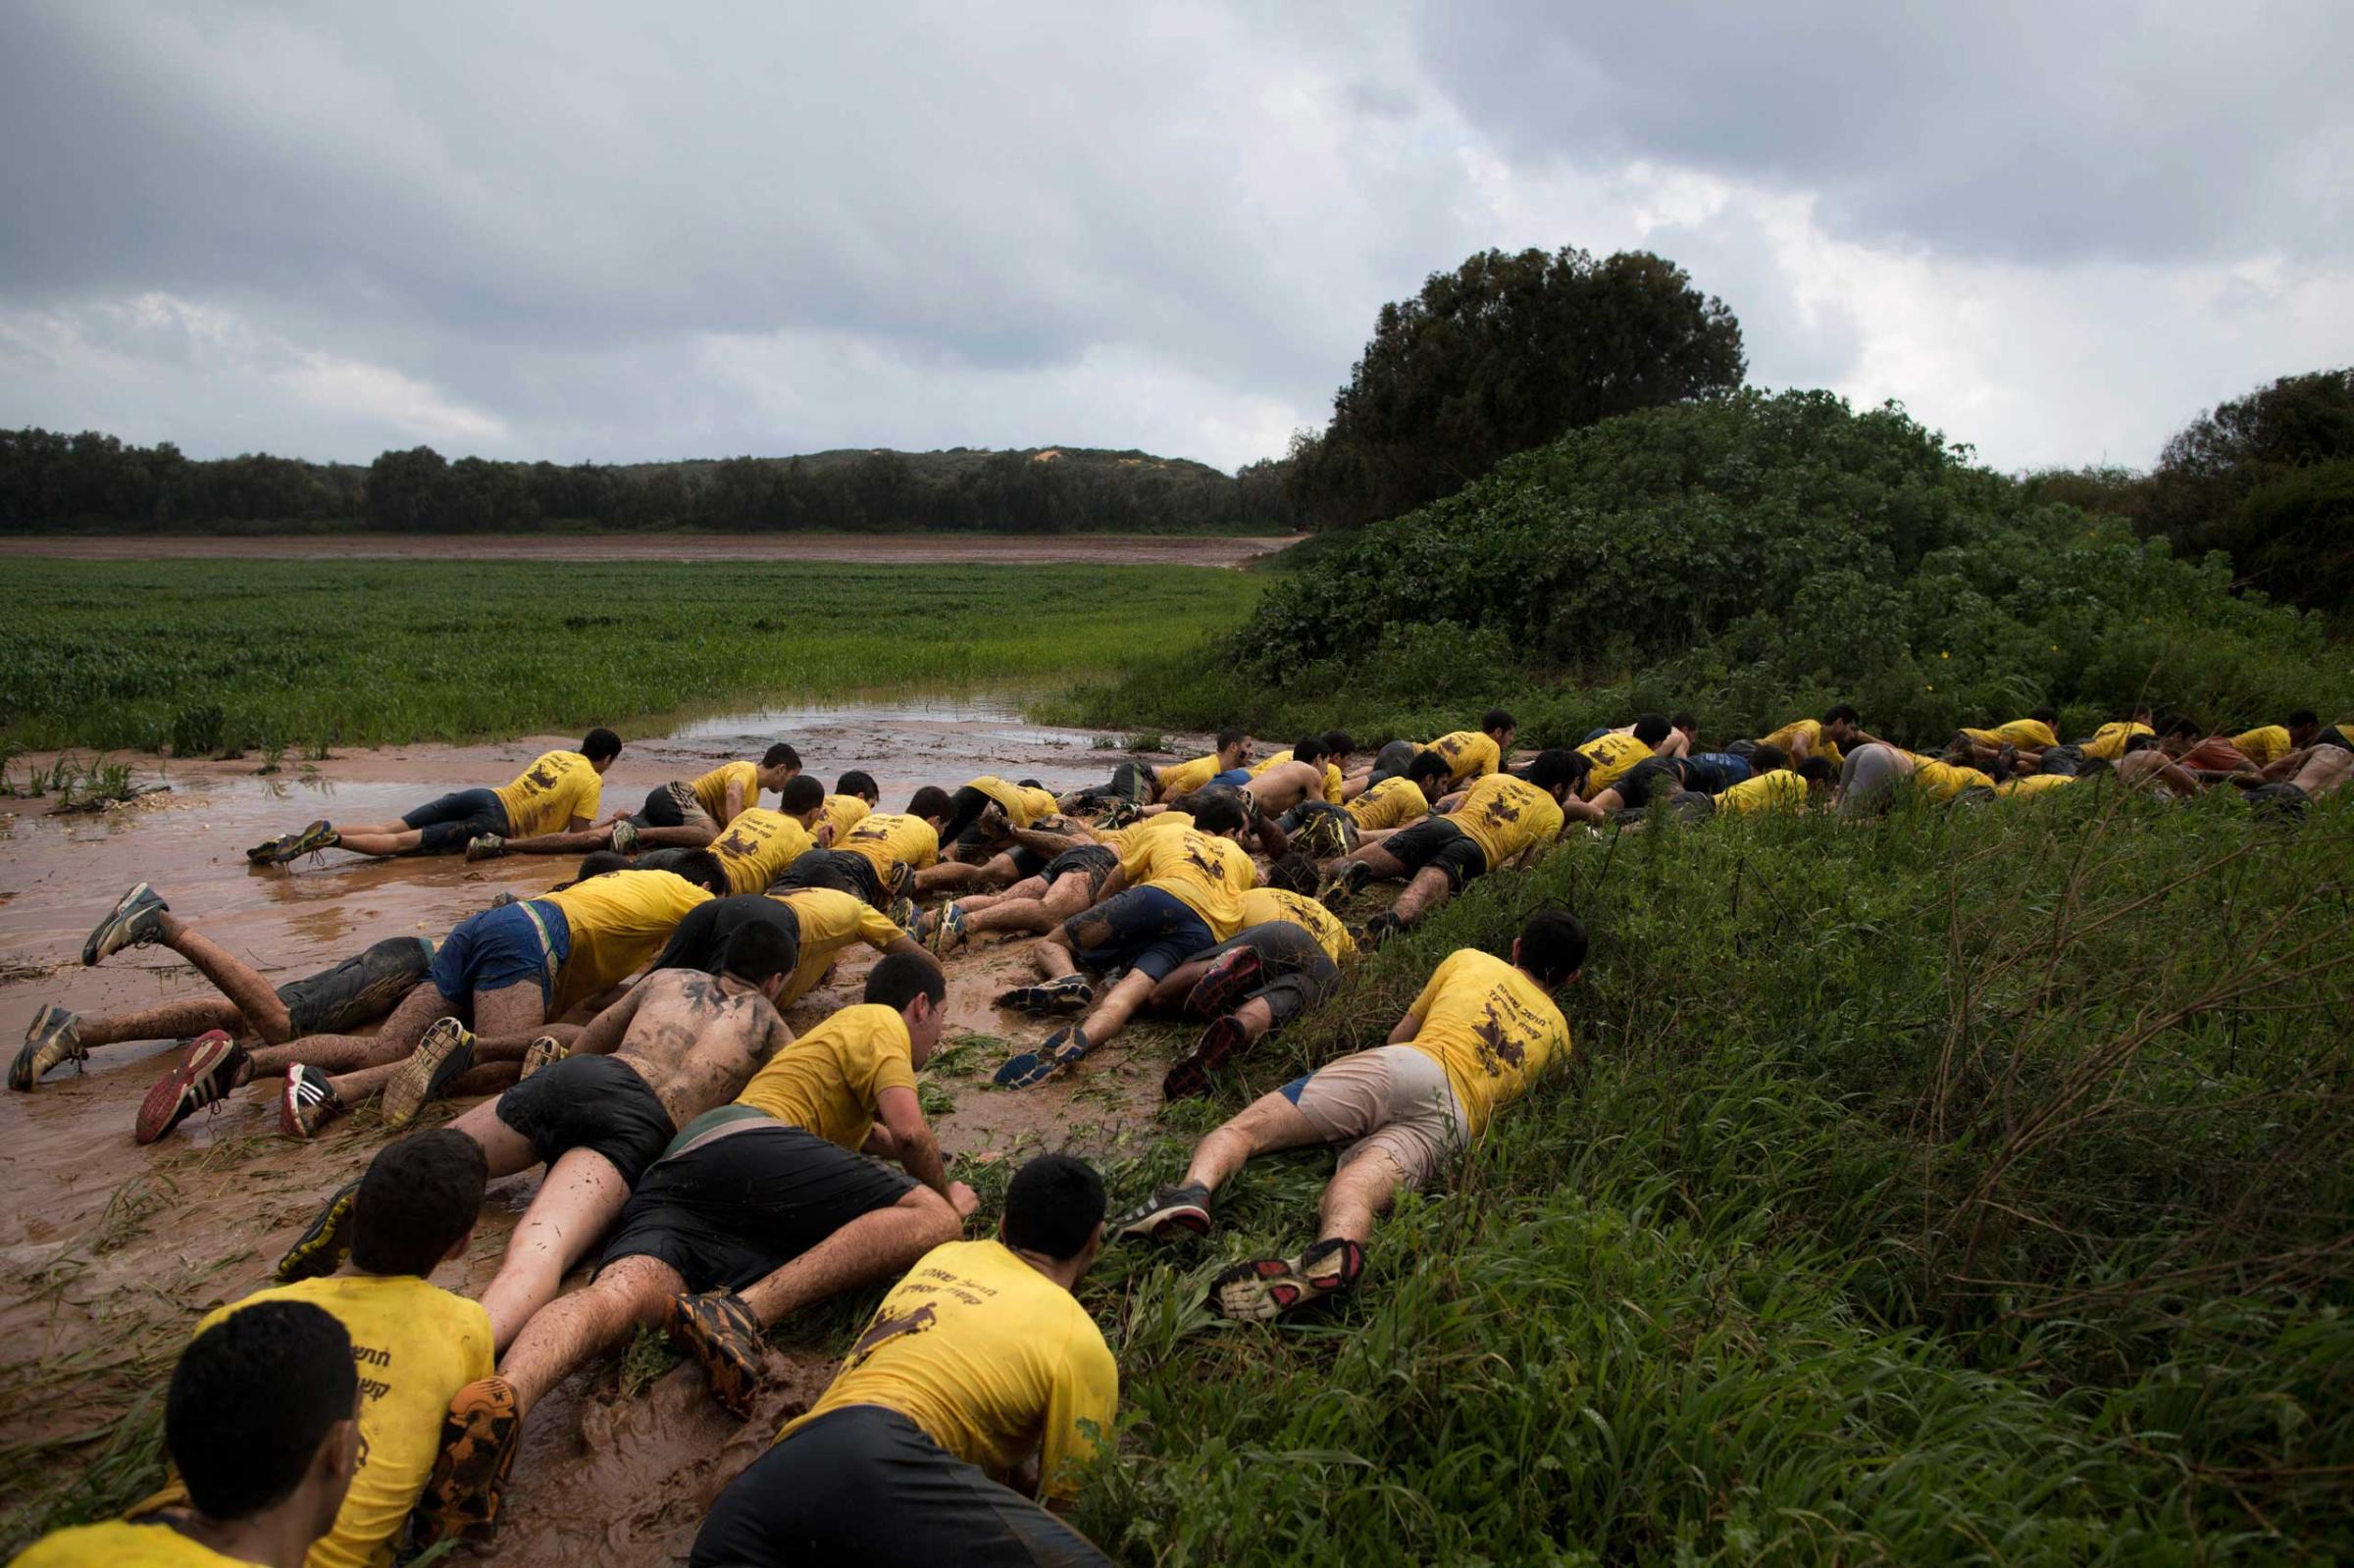 Israeli high-school seniors preparing to join the Israeli military later this year crawl out of mud up to a grassy embankment during an exercise at a privately run training camp for military combat fitness near Yakum, central Israel, Feb. 13, 2015.